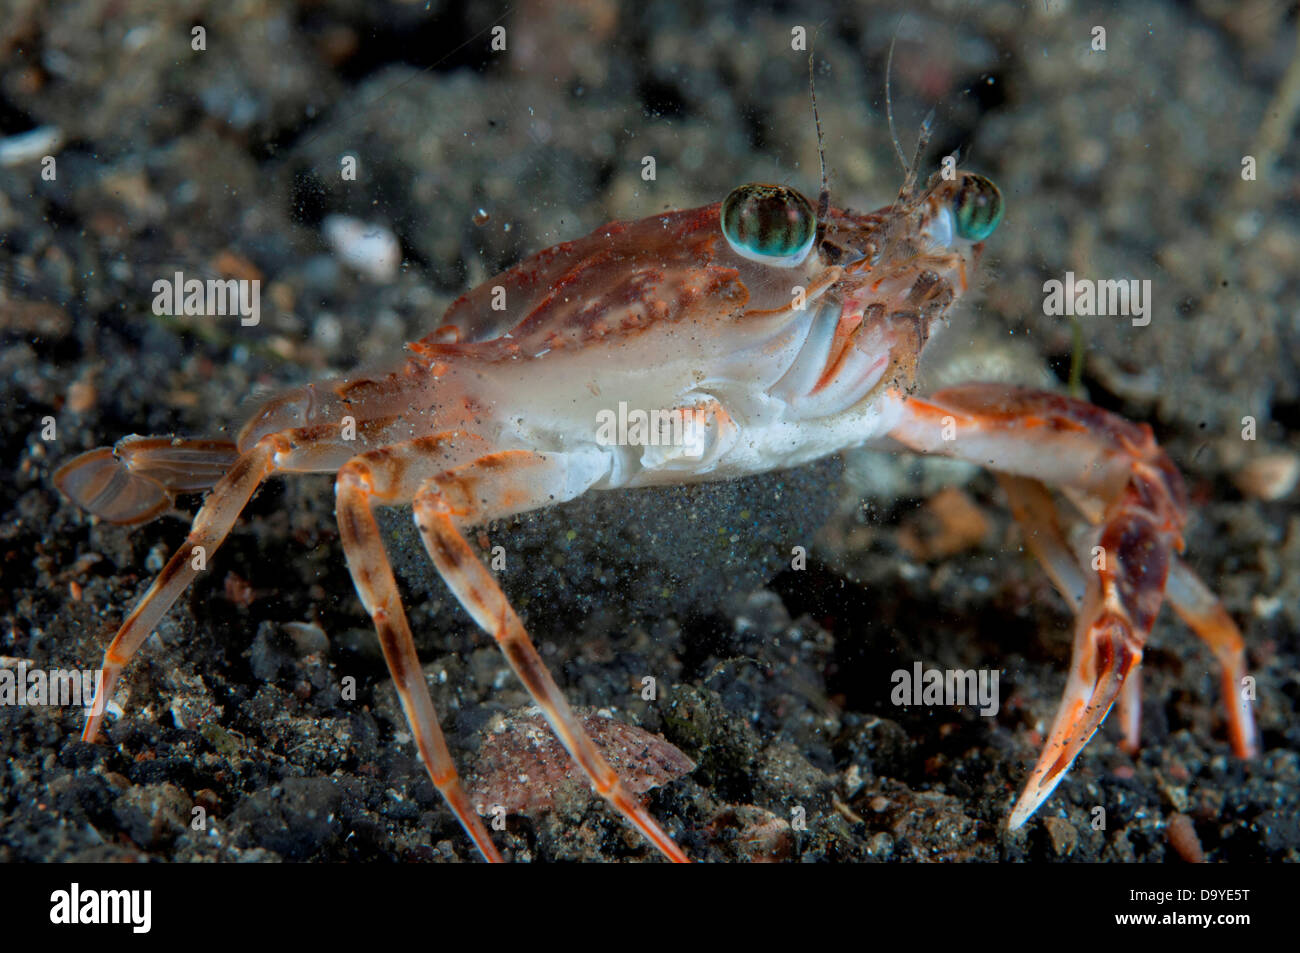 Swimming crab (Thalamita sp.) with carrying eggs, Lembeh Strait, Sulawesi, Indonesia Stock Photo